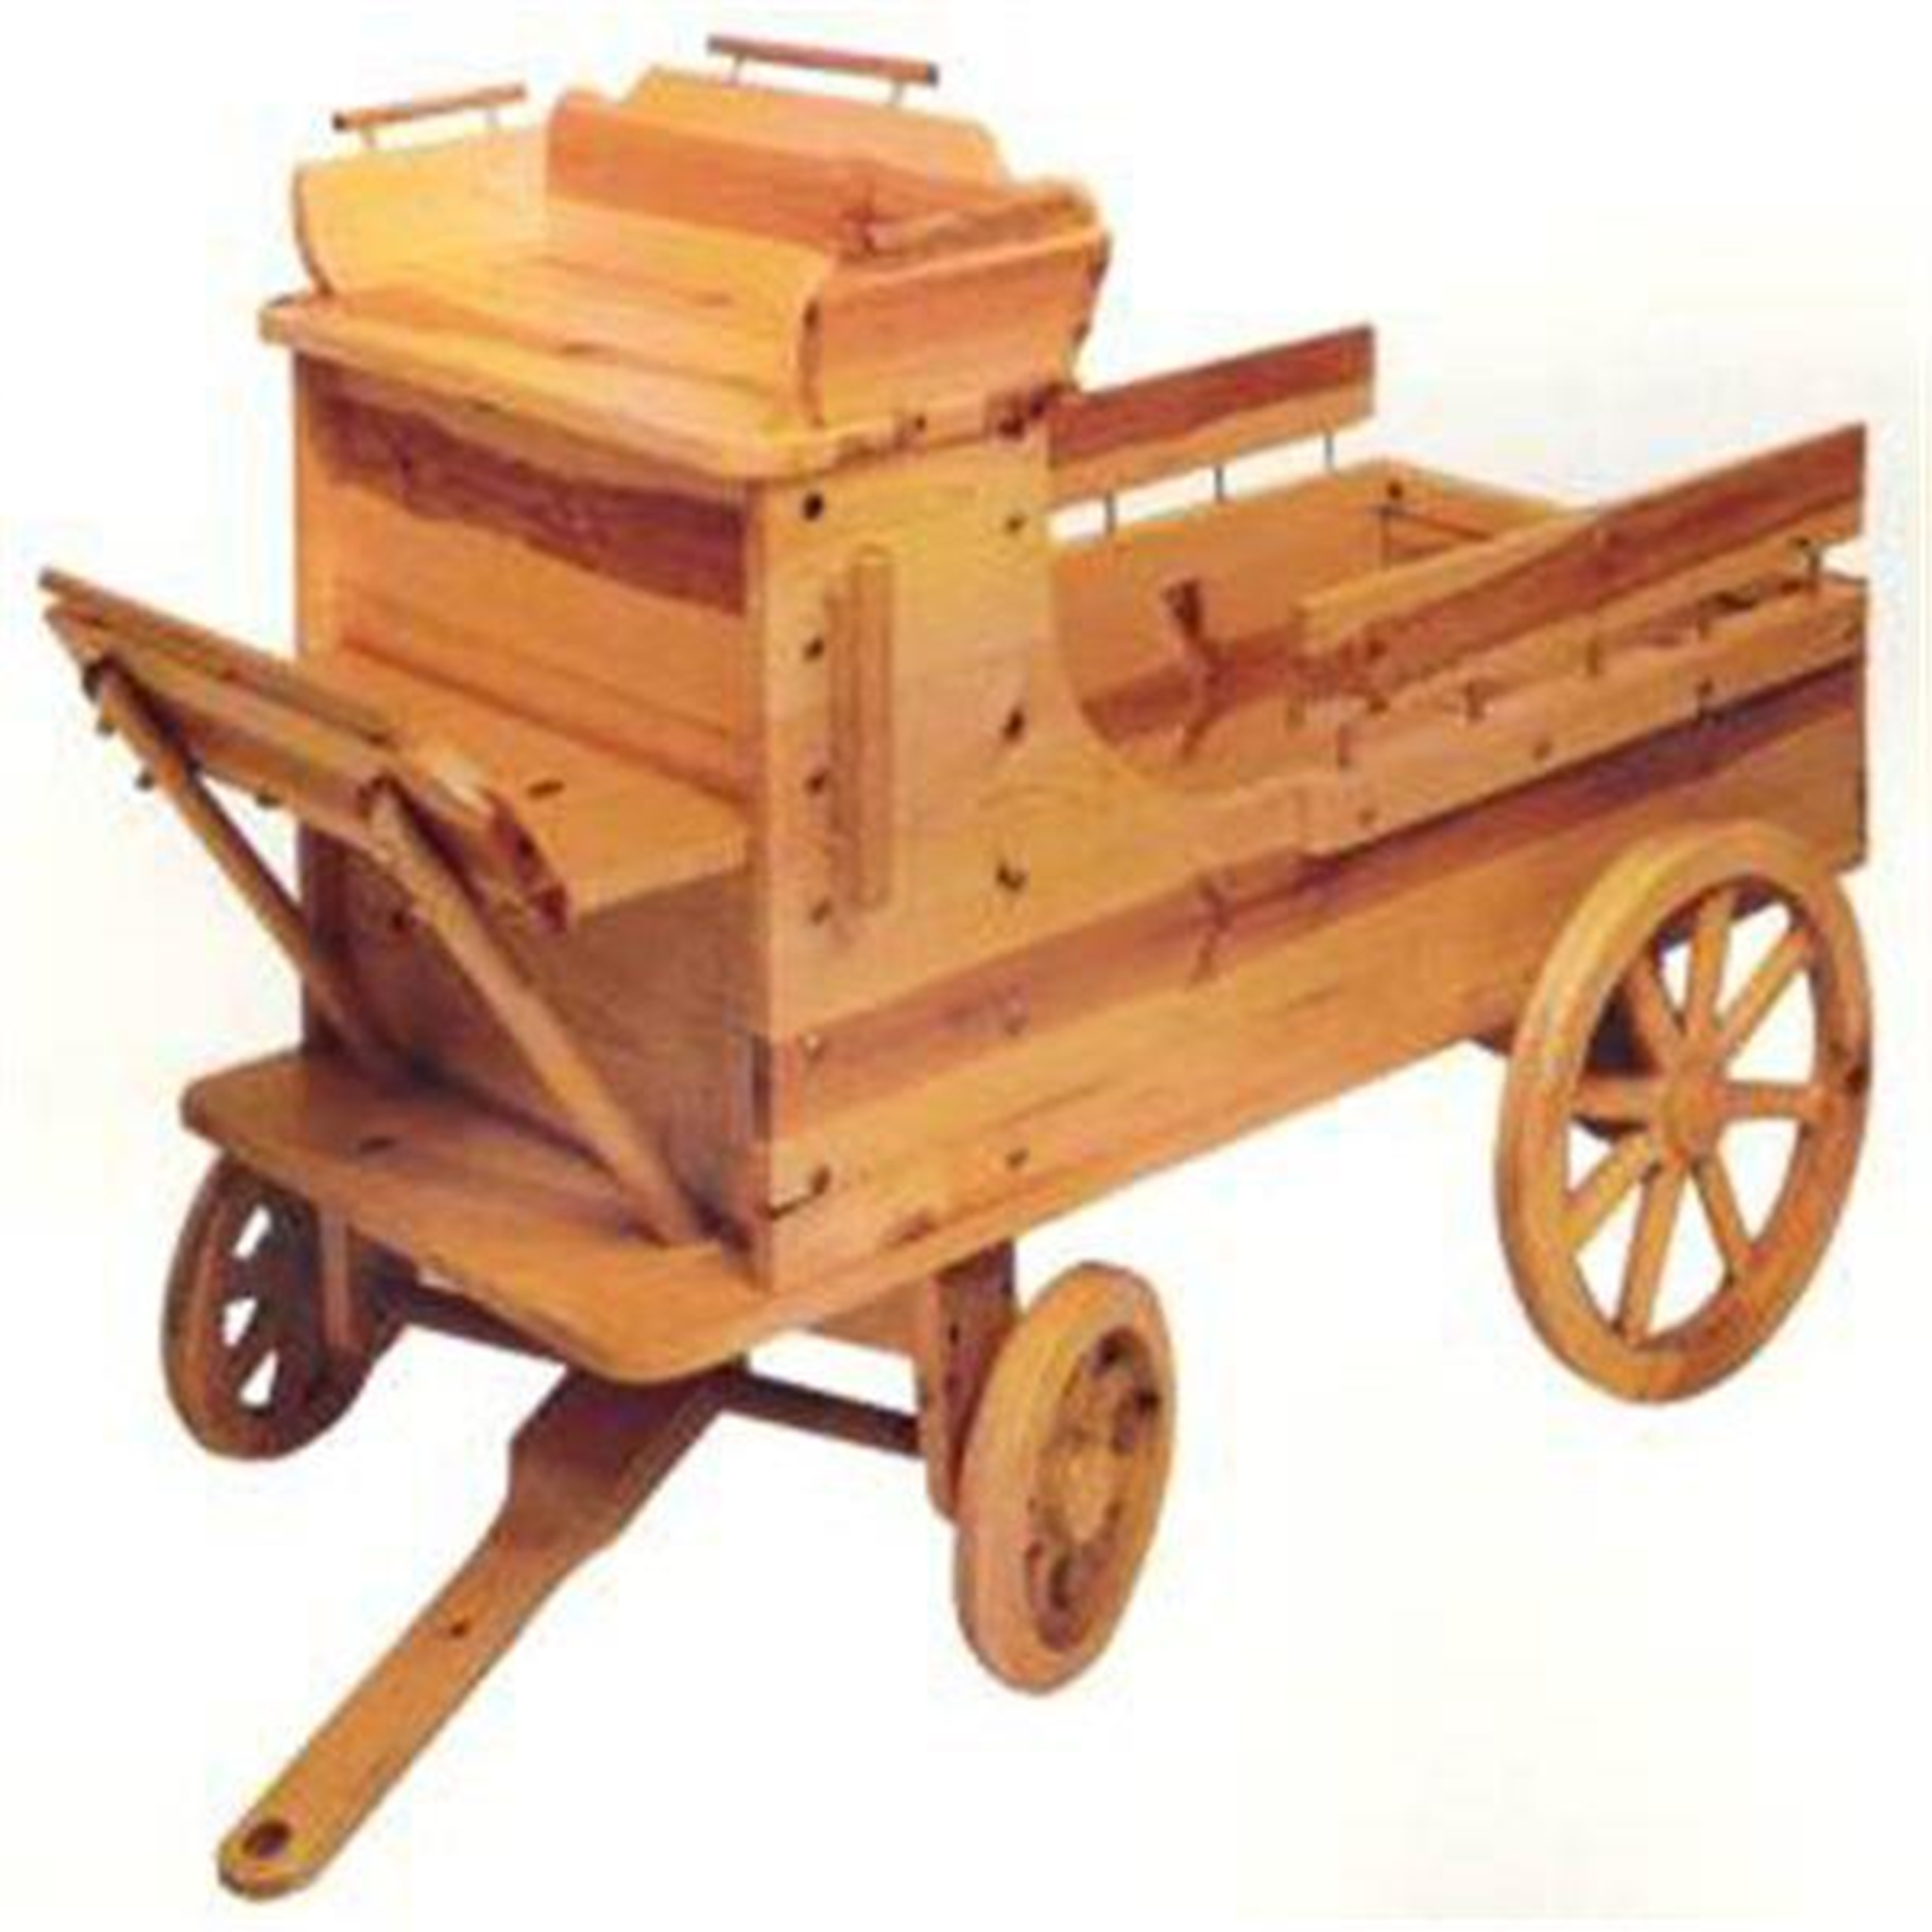 Woodworking Project Paper Plan To Build Toy Box Wagon